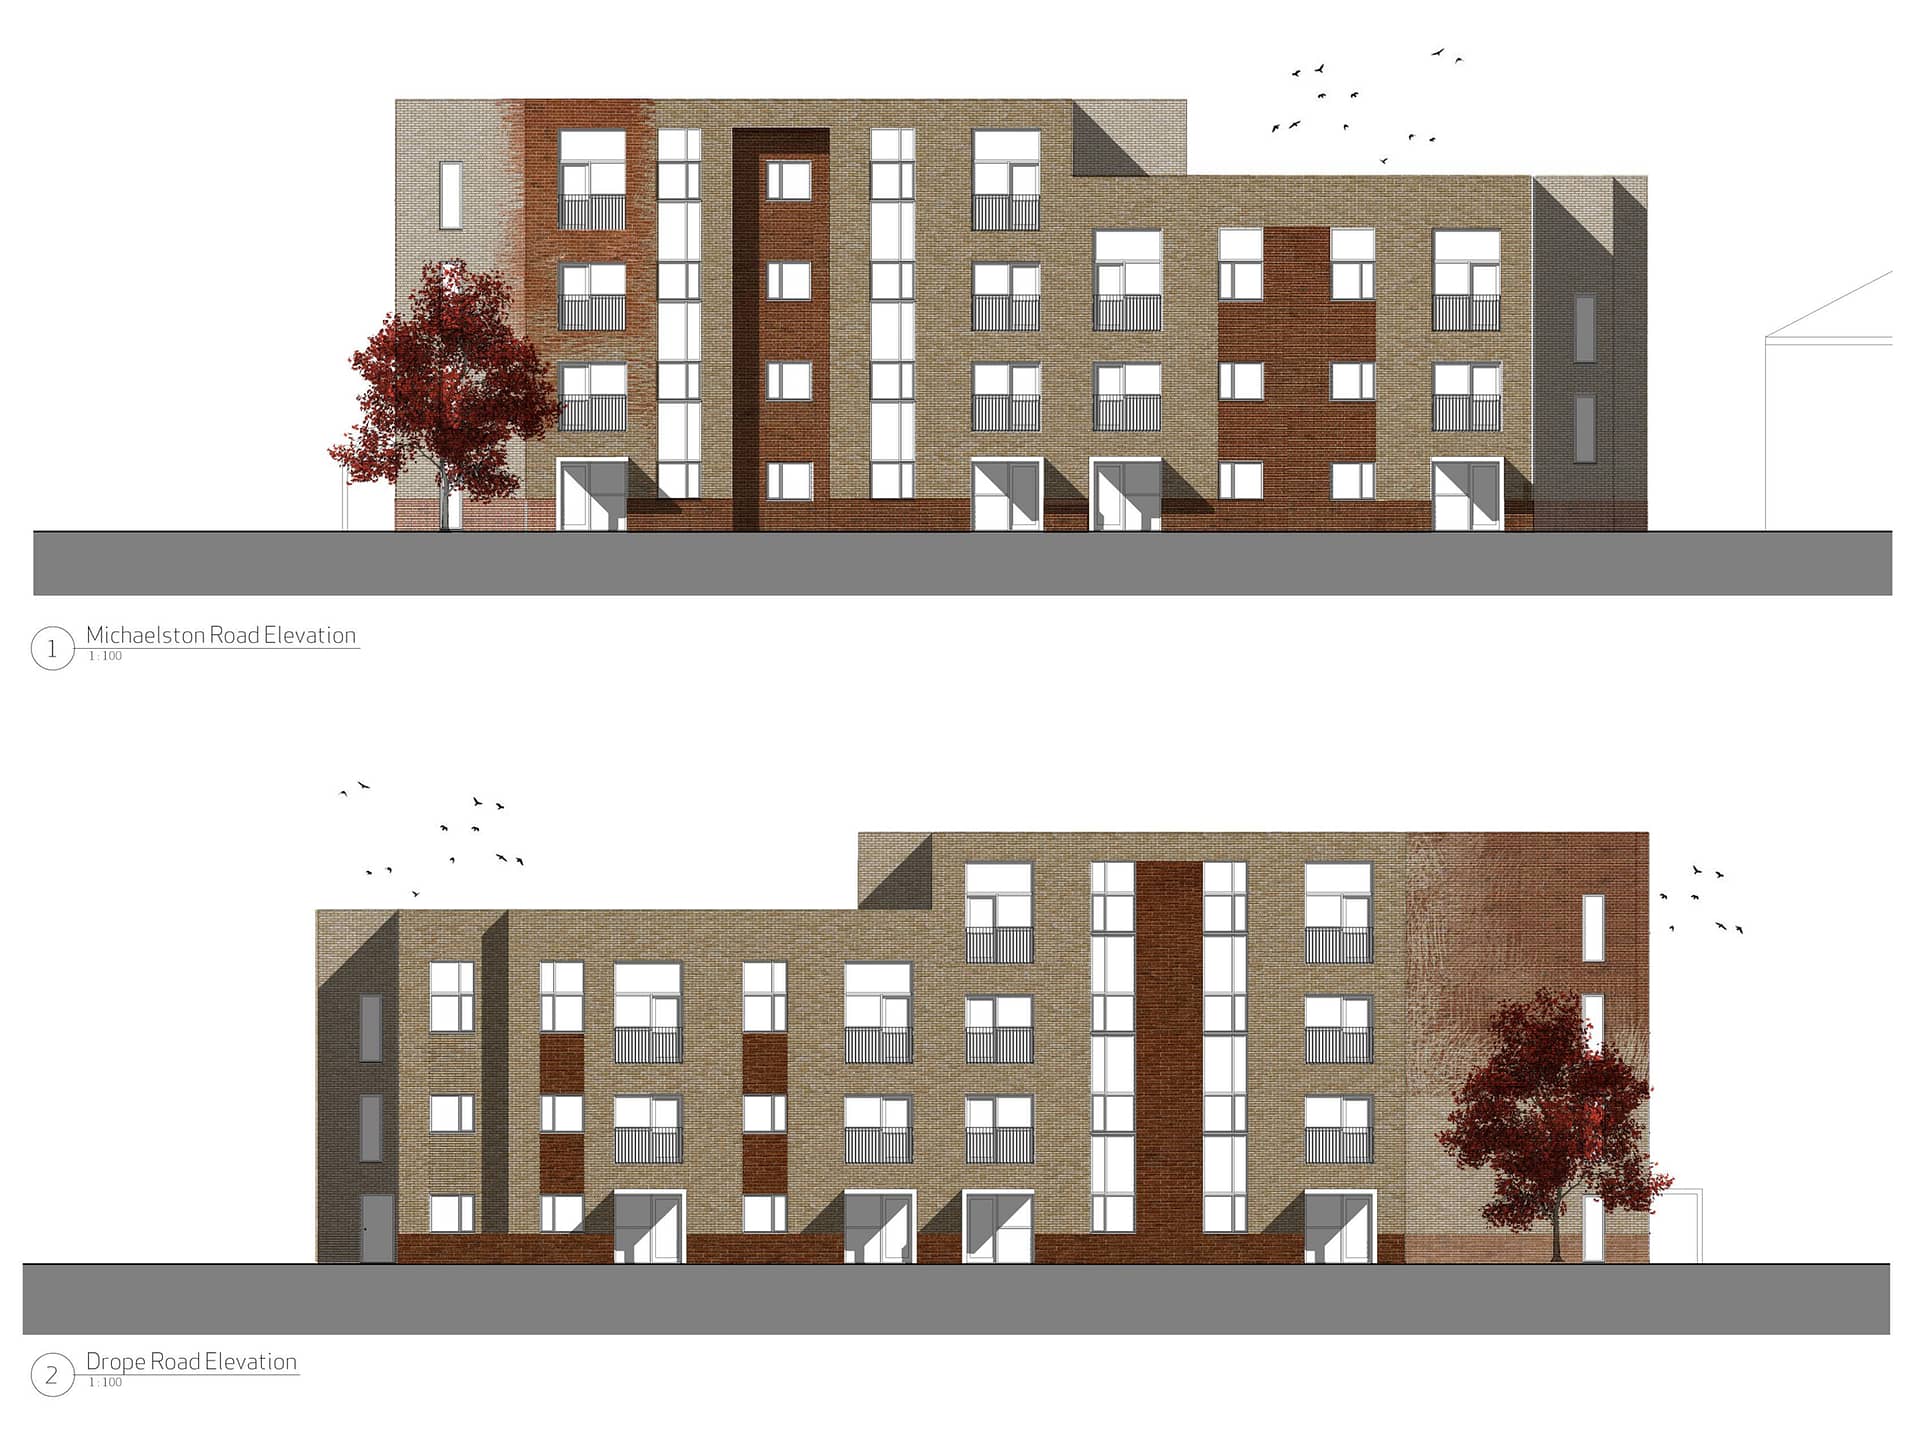 Michaelstone Road Housing, Cardiff - Apartments elevations